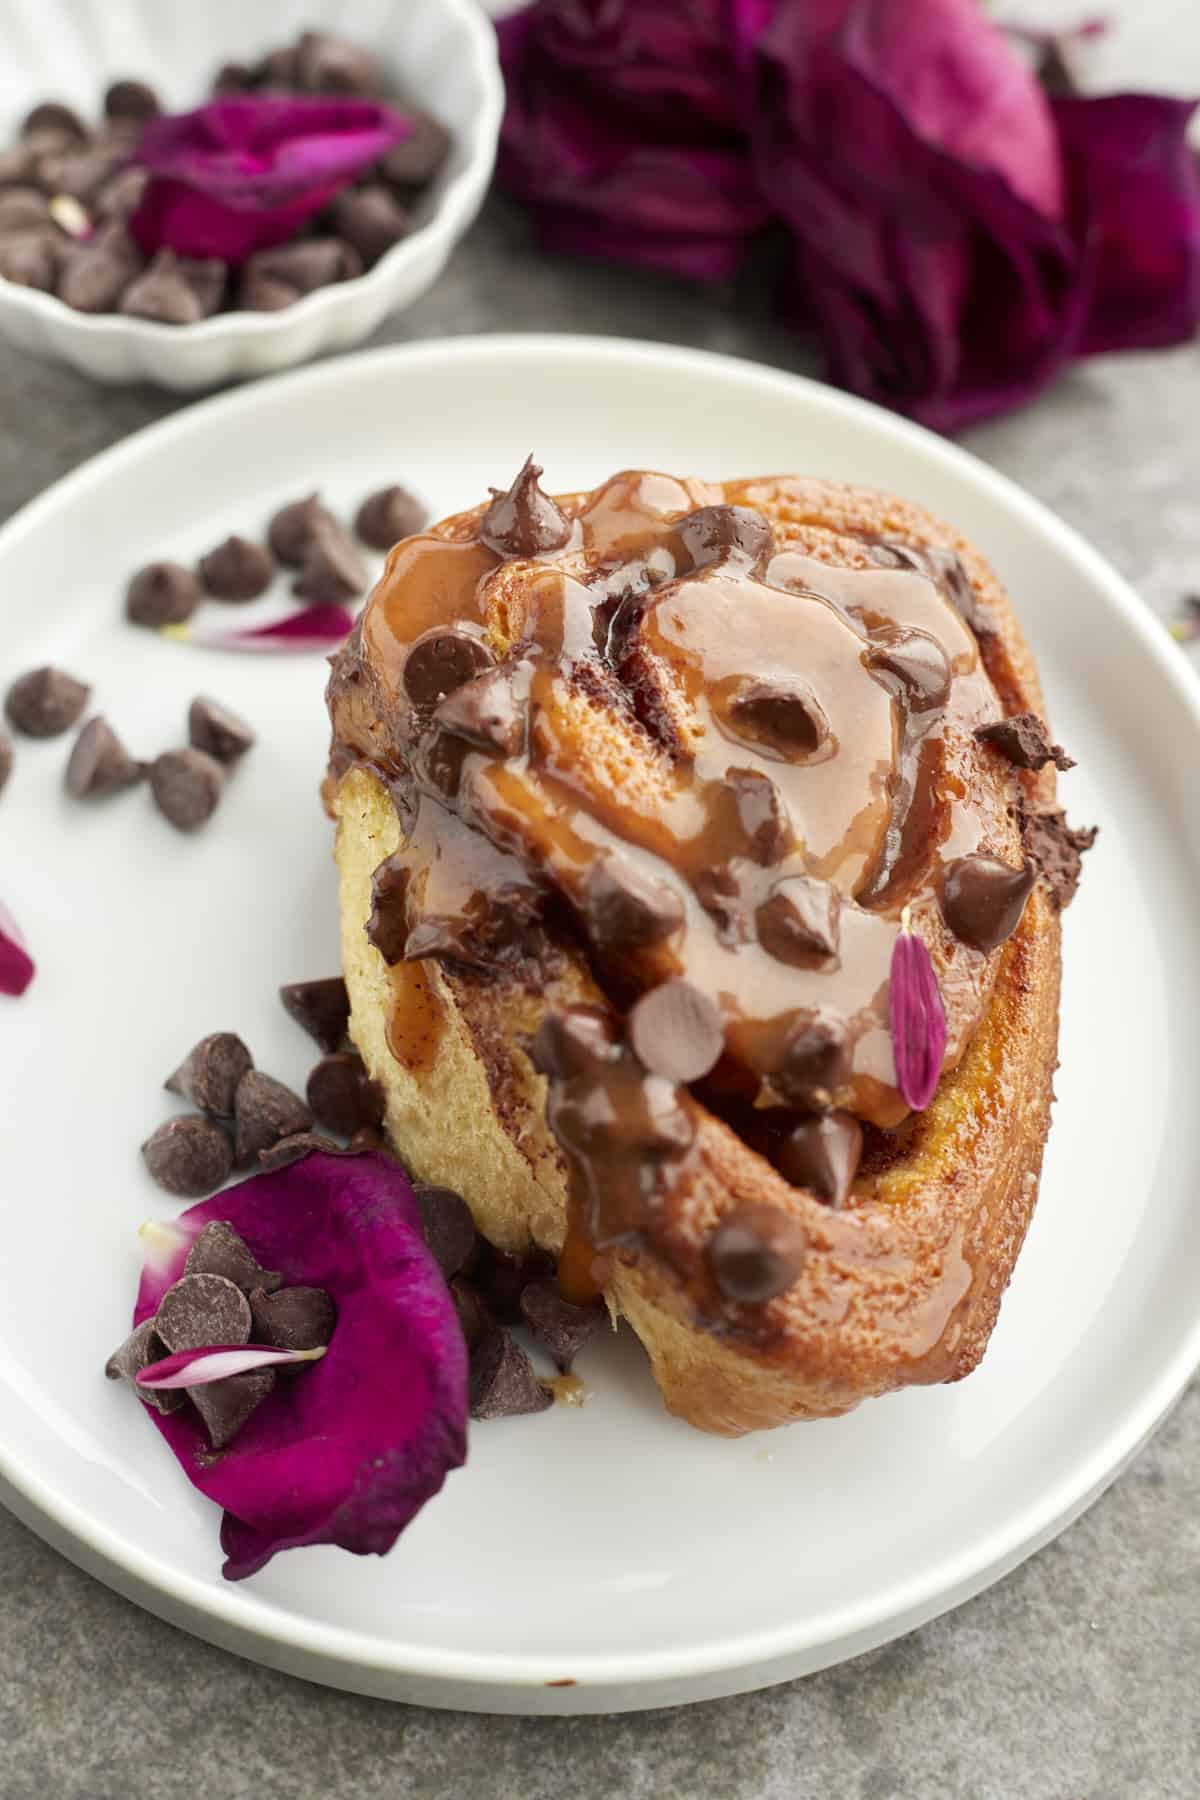 a caramel chocolate chip cinnamon roll on a white plate with scattered chocolate chips and a pink rose